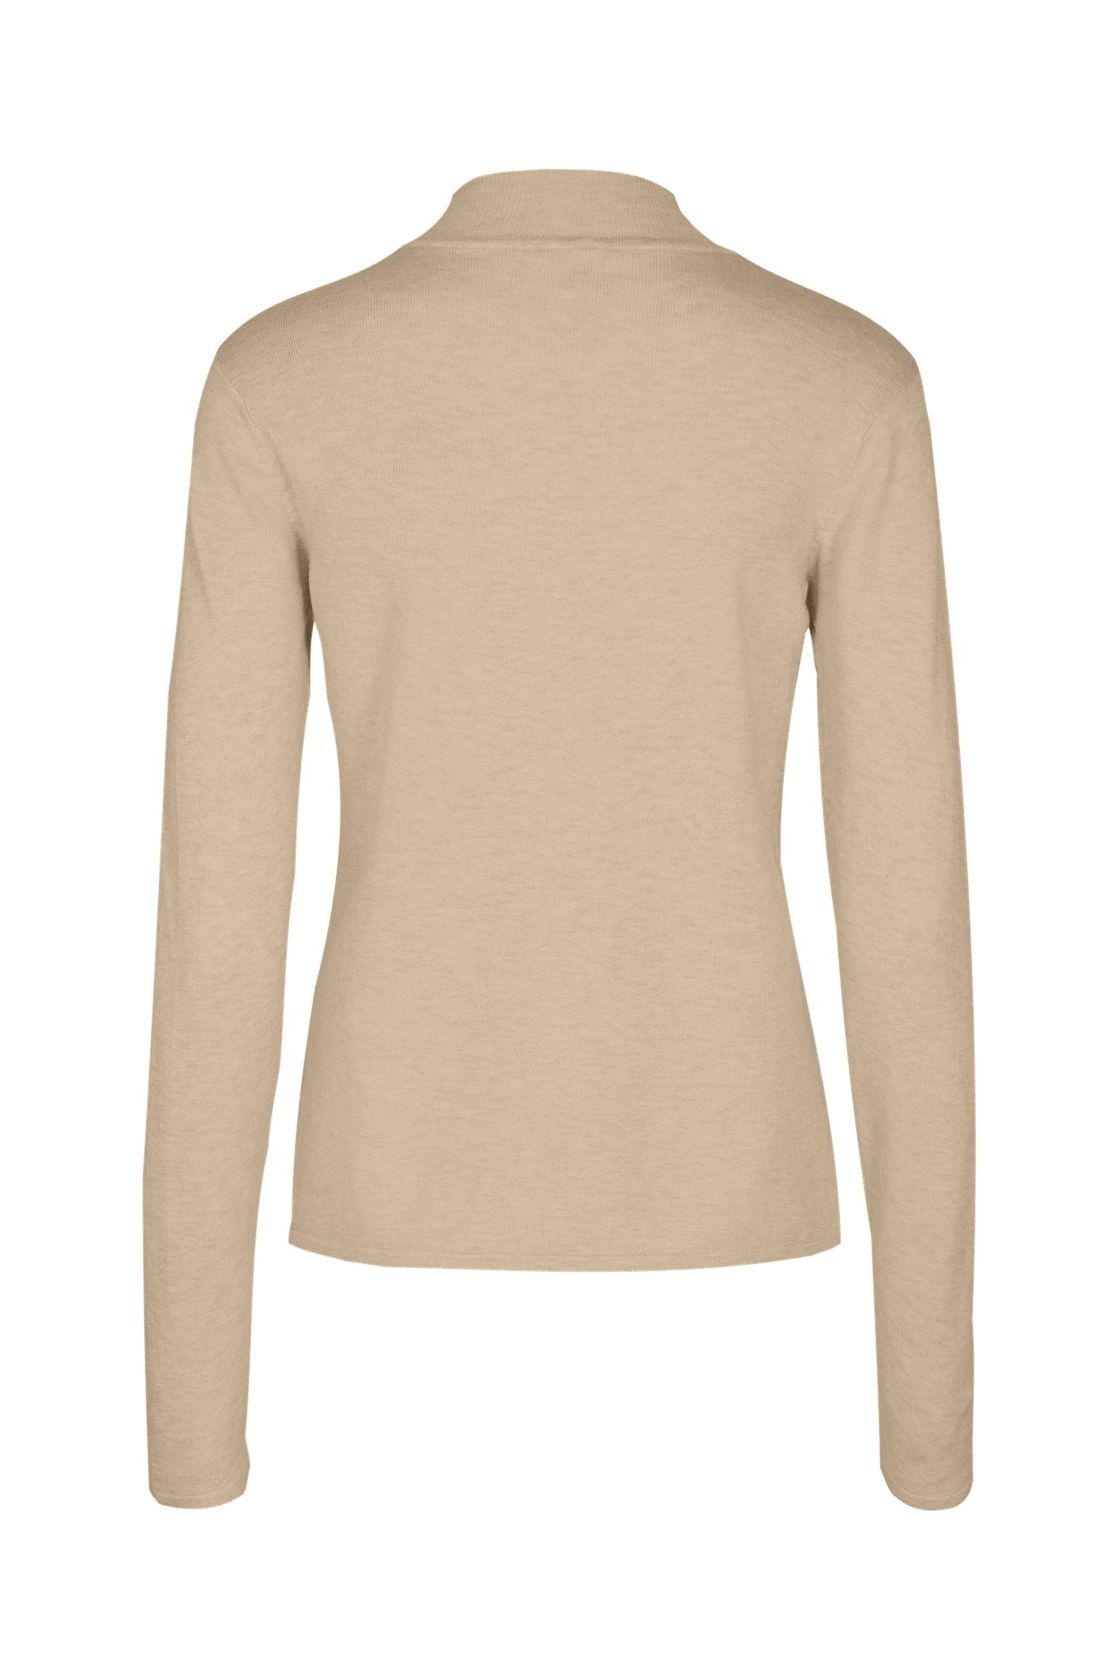 SoyaConcept - Dollie 245 - Classic Pullover Knit Lightweight Sweater - Sand - 32993 -